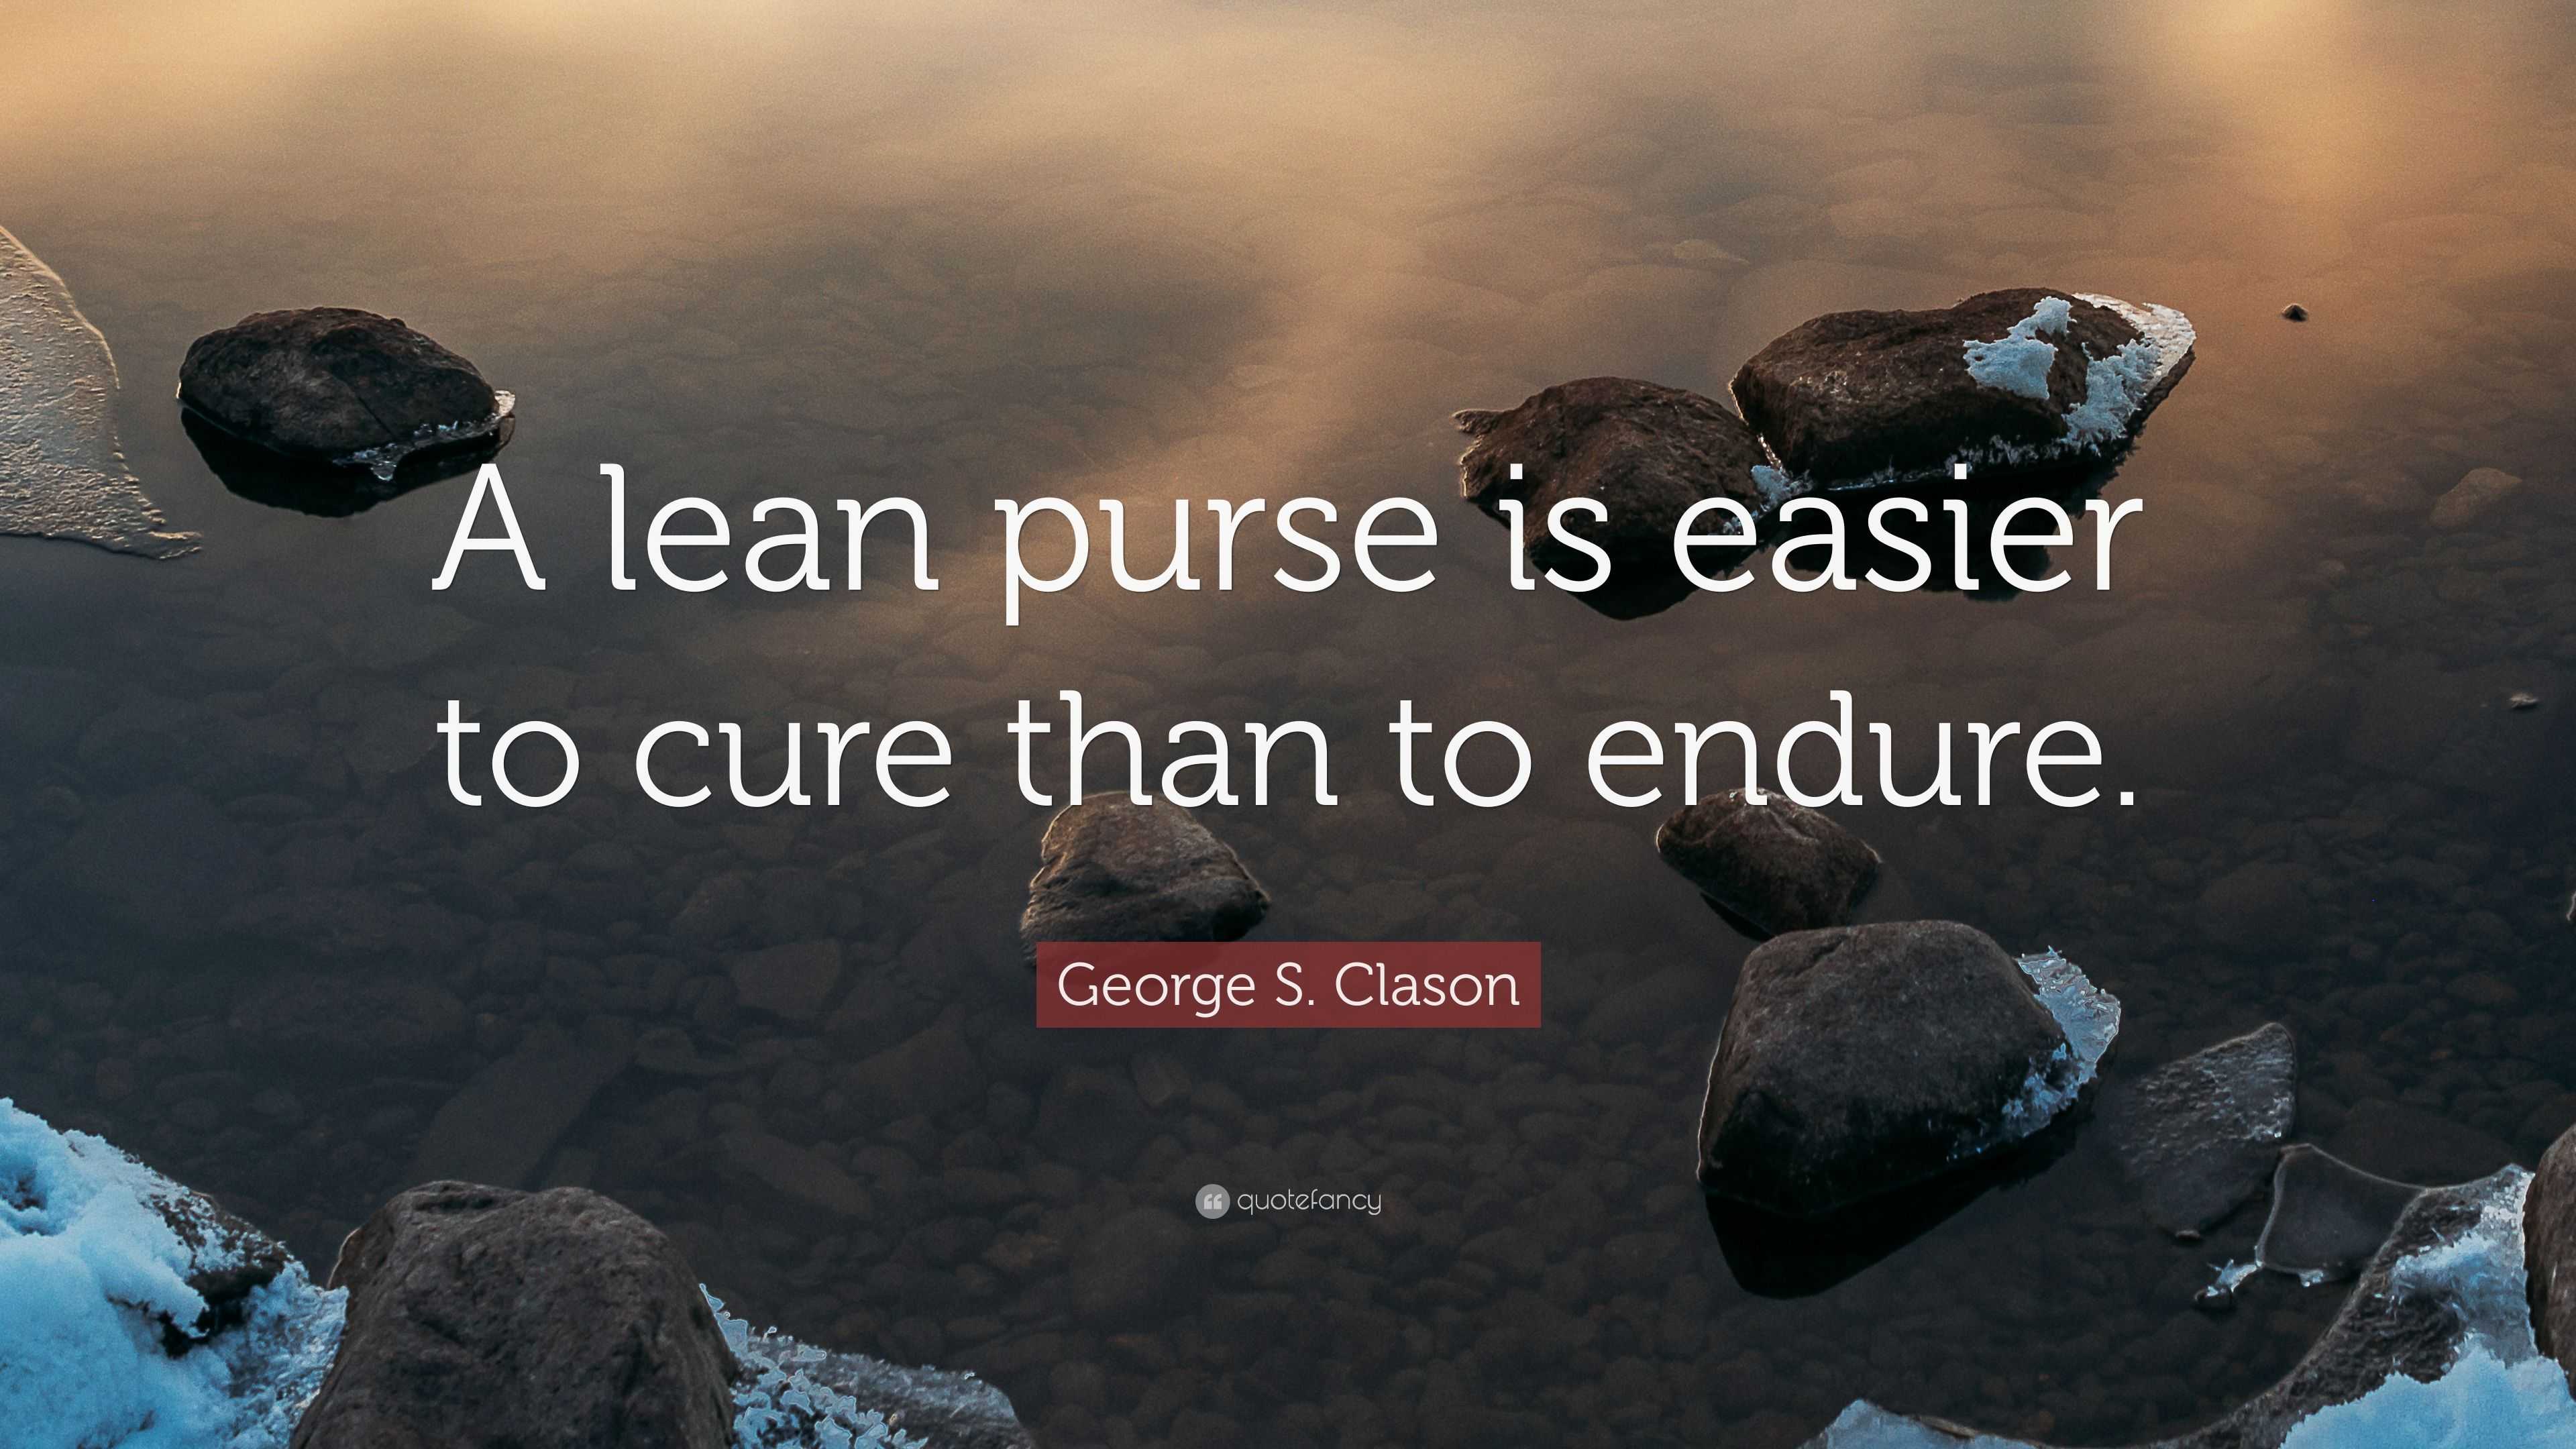 2647567 George S Clason Quote A lean purse is easier to cure than to